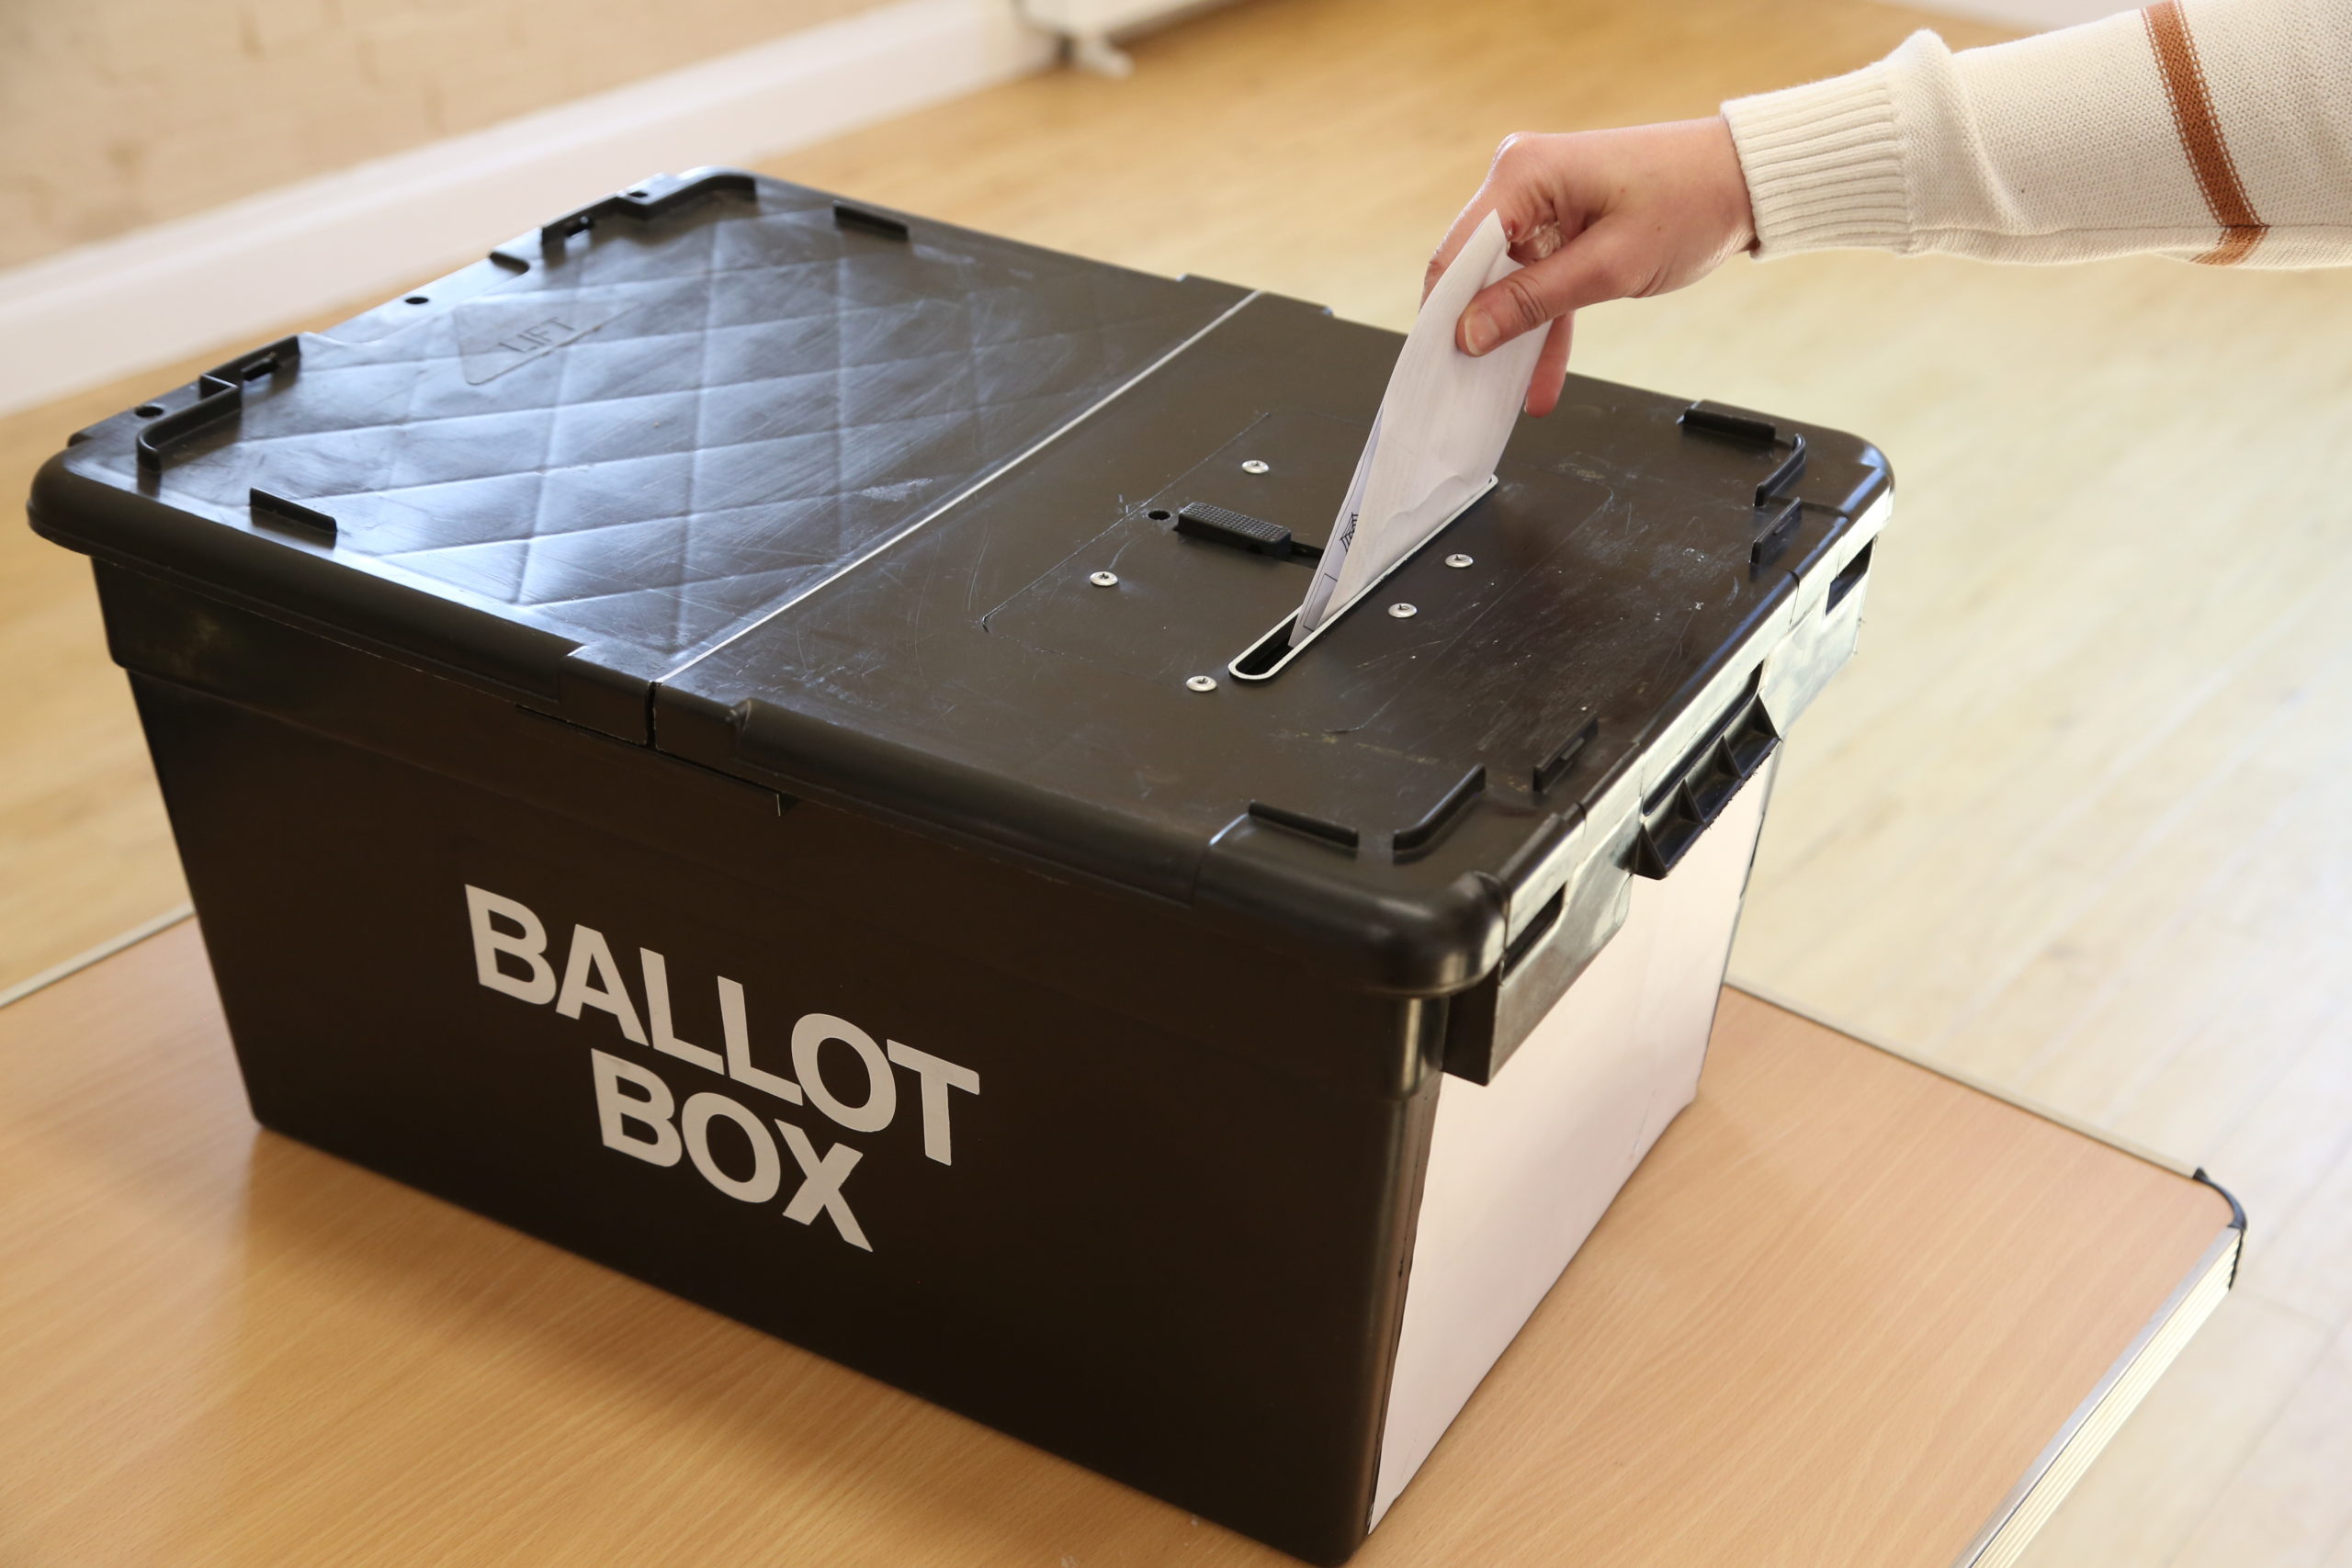 A photo of someone's arm posting a paper into a ballot box